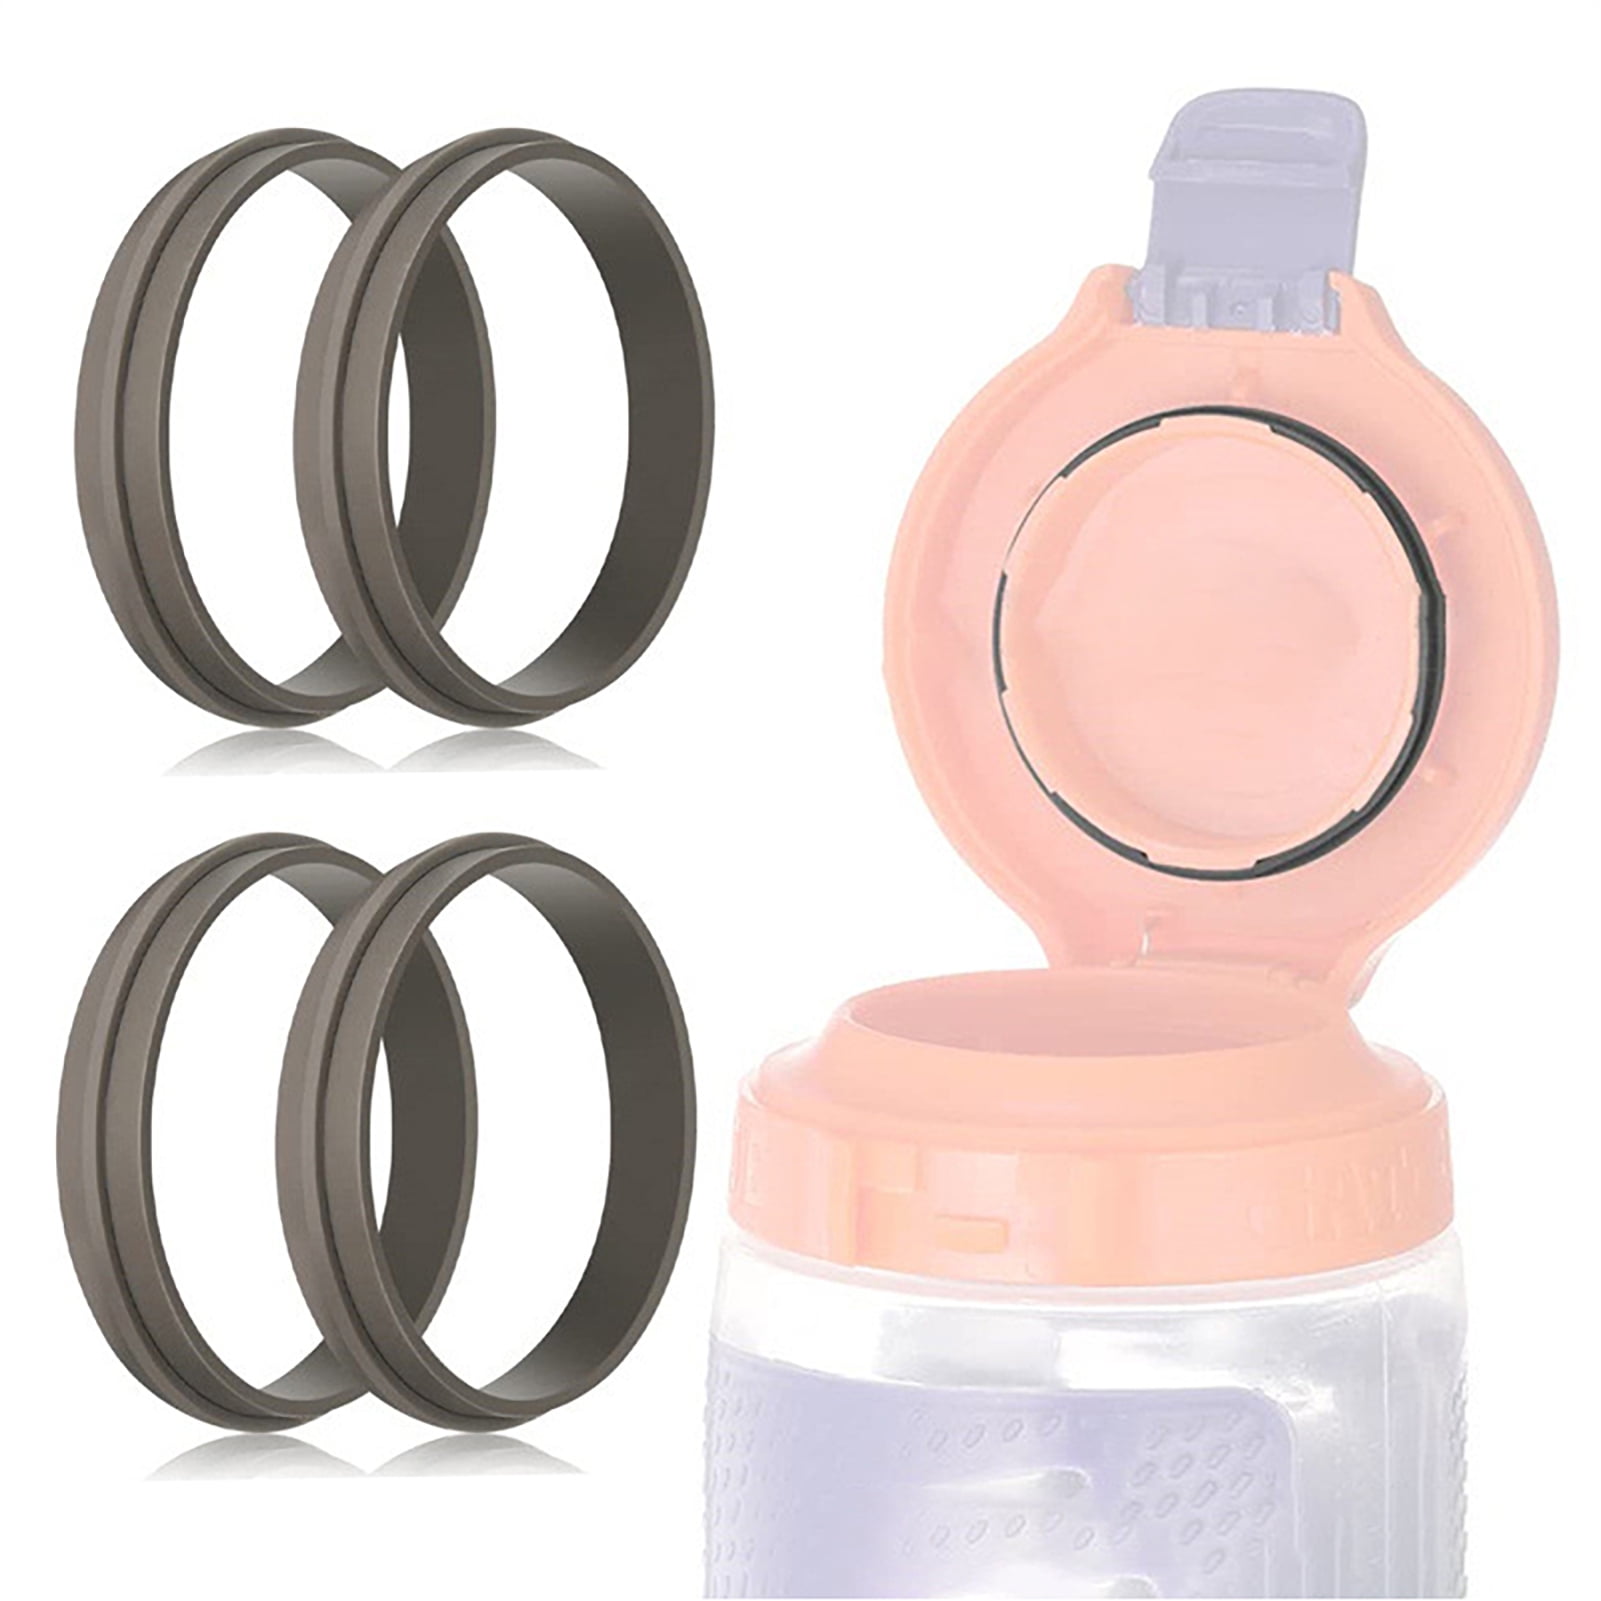 Parts G21seals Replacement Seals for Flip Lid for 21 oz Glass Water Bottle - 2 Sets